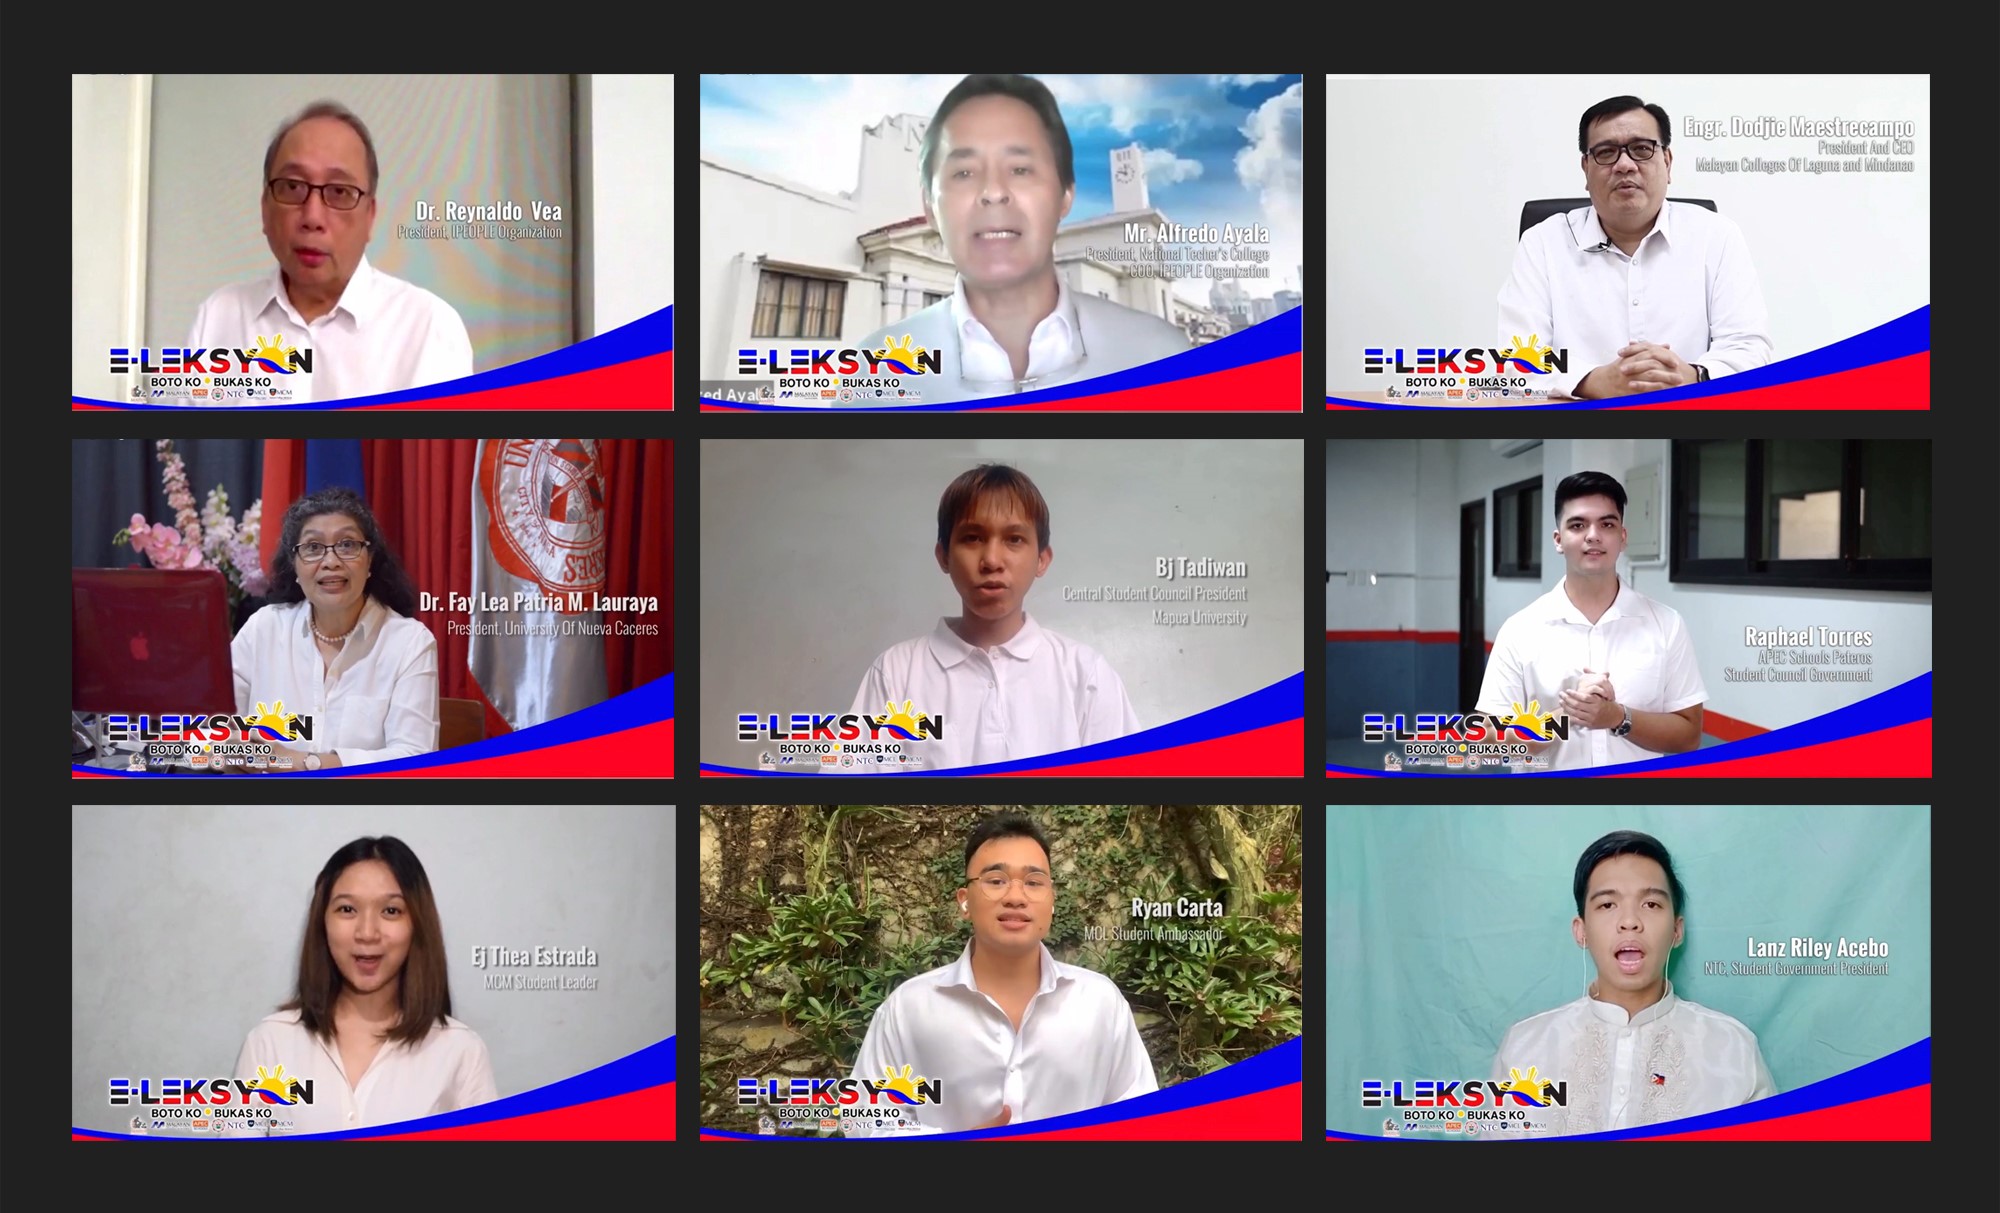 iPeople schools' administrators and students in the Manifesto video signifying their intent to become responsible voters during the "E-Leksyon: Boto Ko, Bukas Ko" campaign’s online launch.